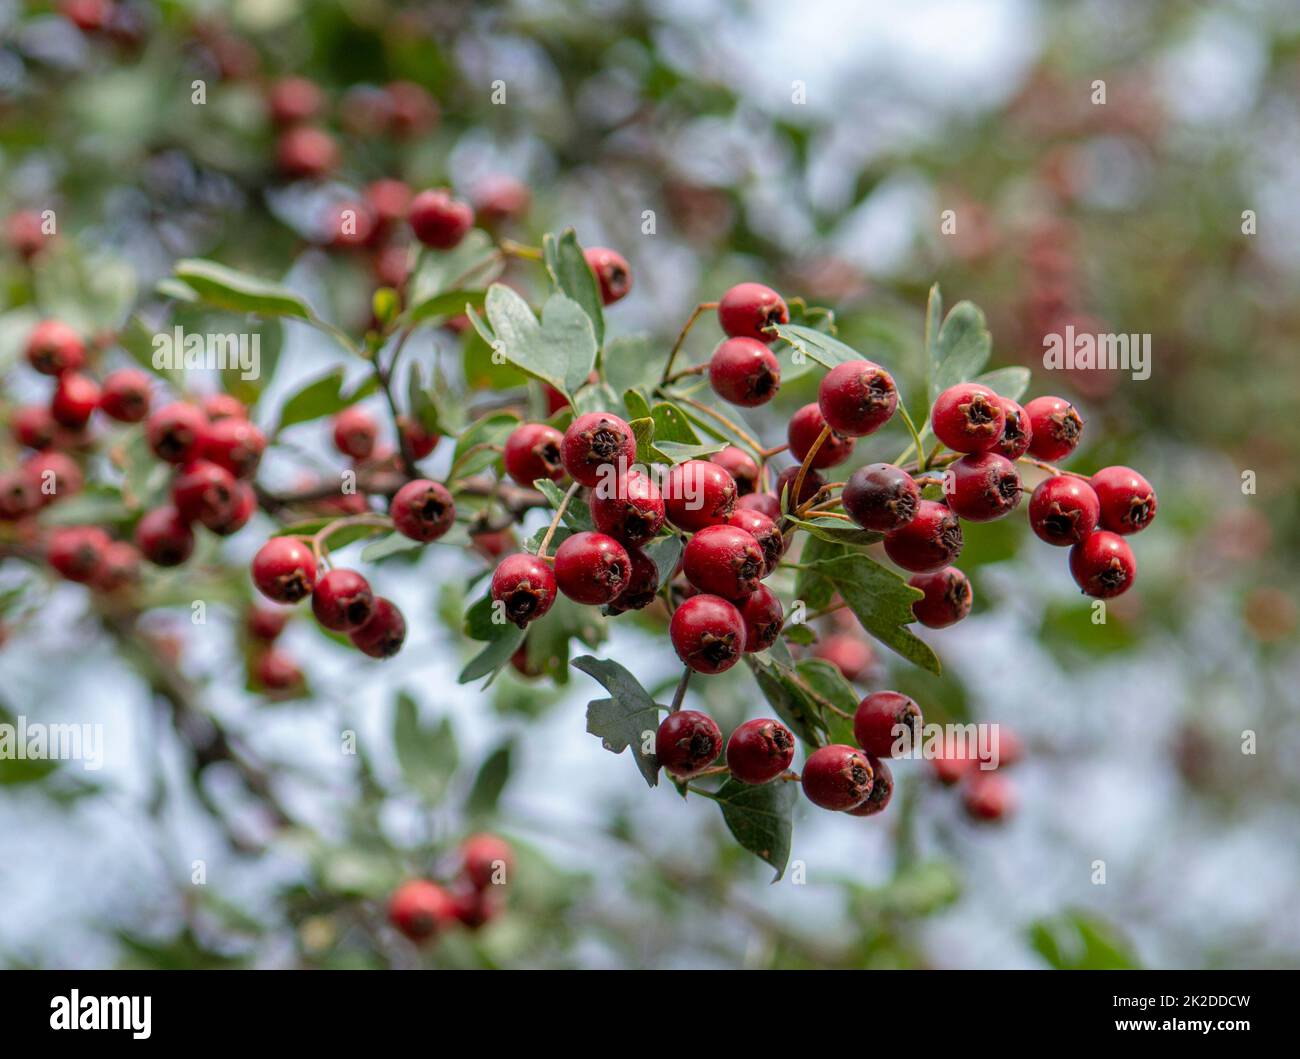 Red Hawthorn (Crataegus) berries in autumn. The plant is also known as Quickthorn, Thornapple, Whitethorn, Mayflower or Hawberry. Stock Photo